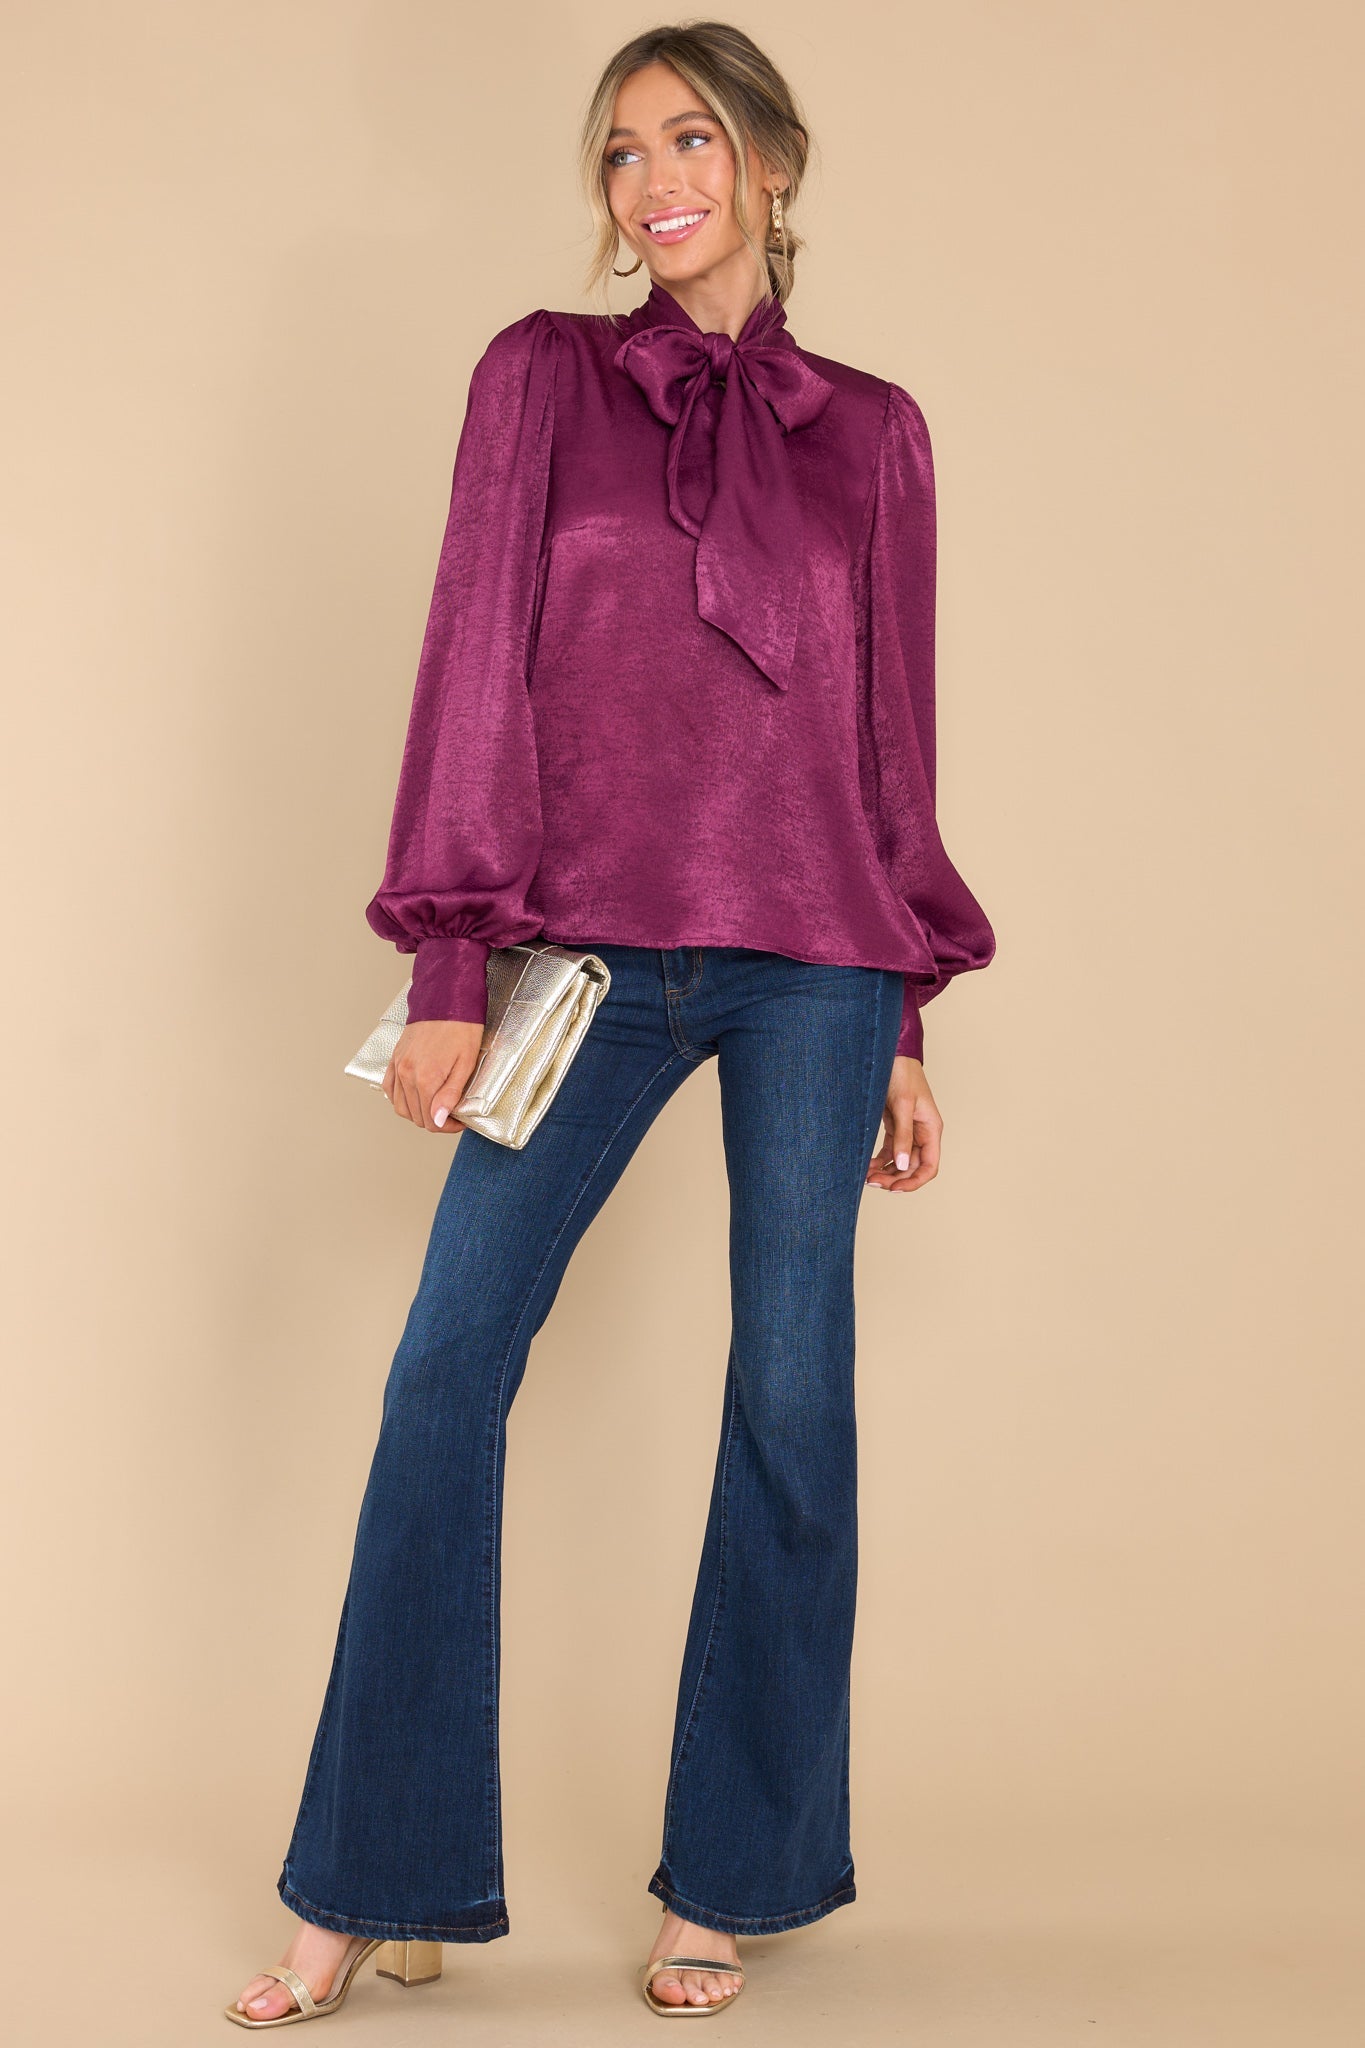 This dark berry top features a high neckline with an adjustable self tie, flowy balloon sleeves with two buttons at the cuff, and a relaxed fit.